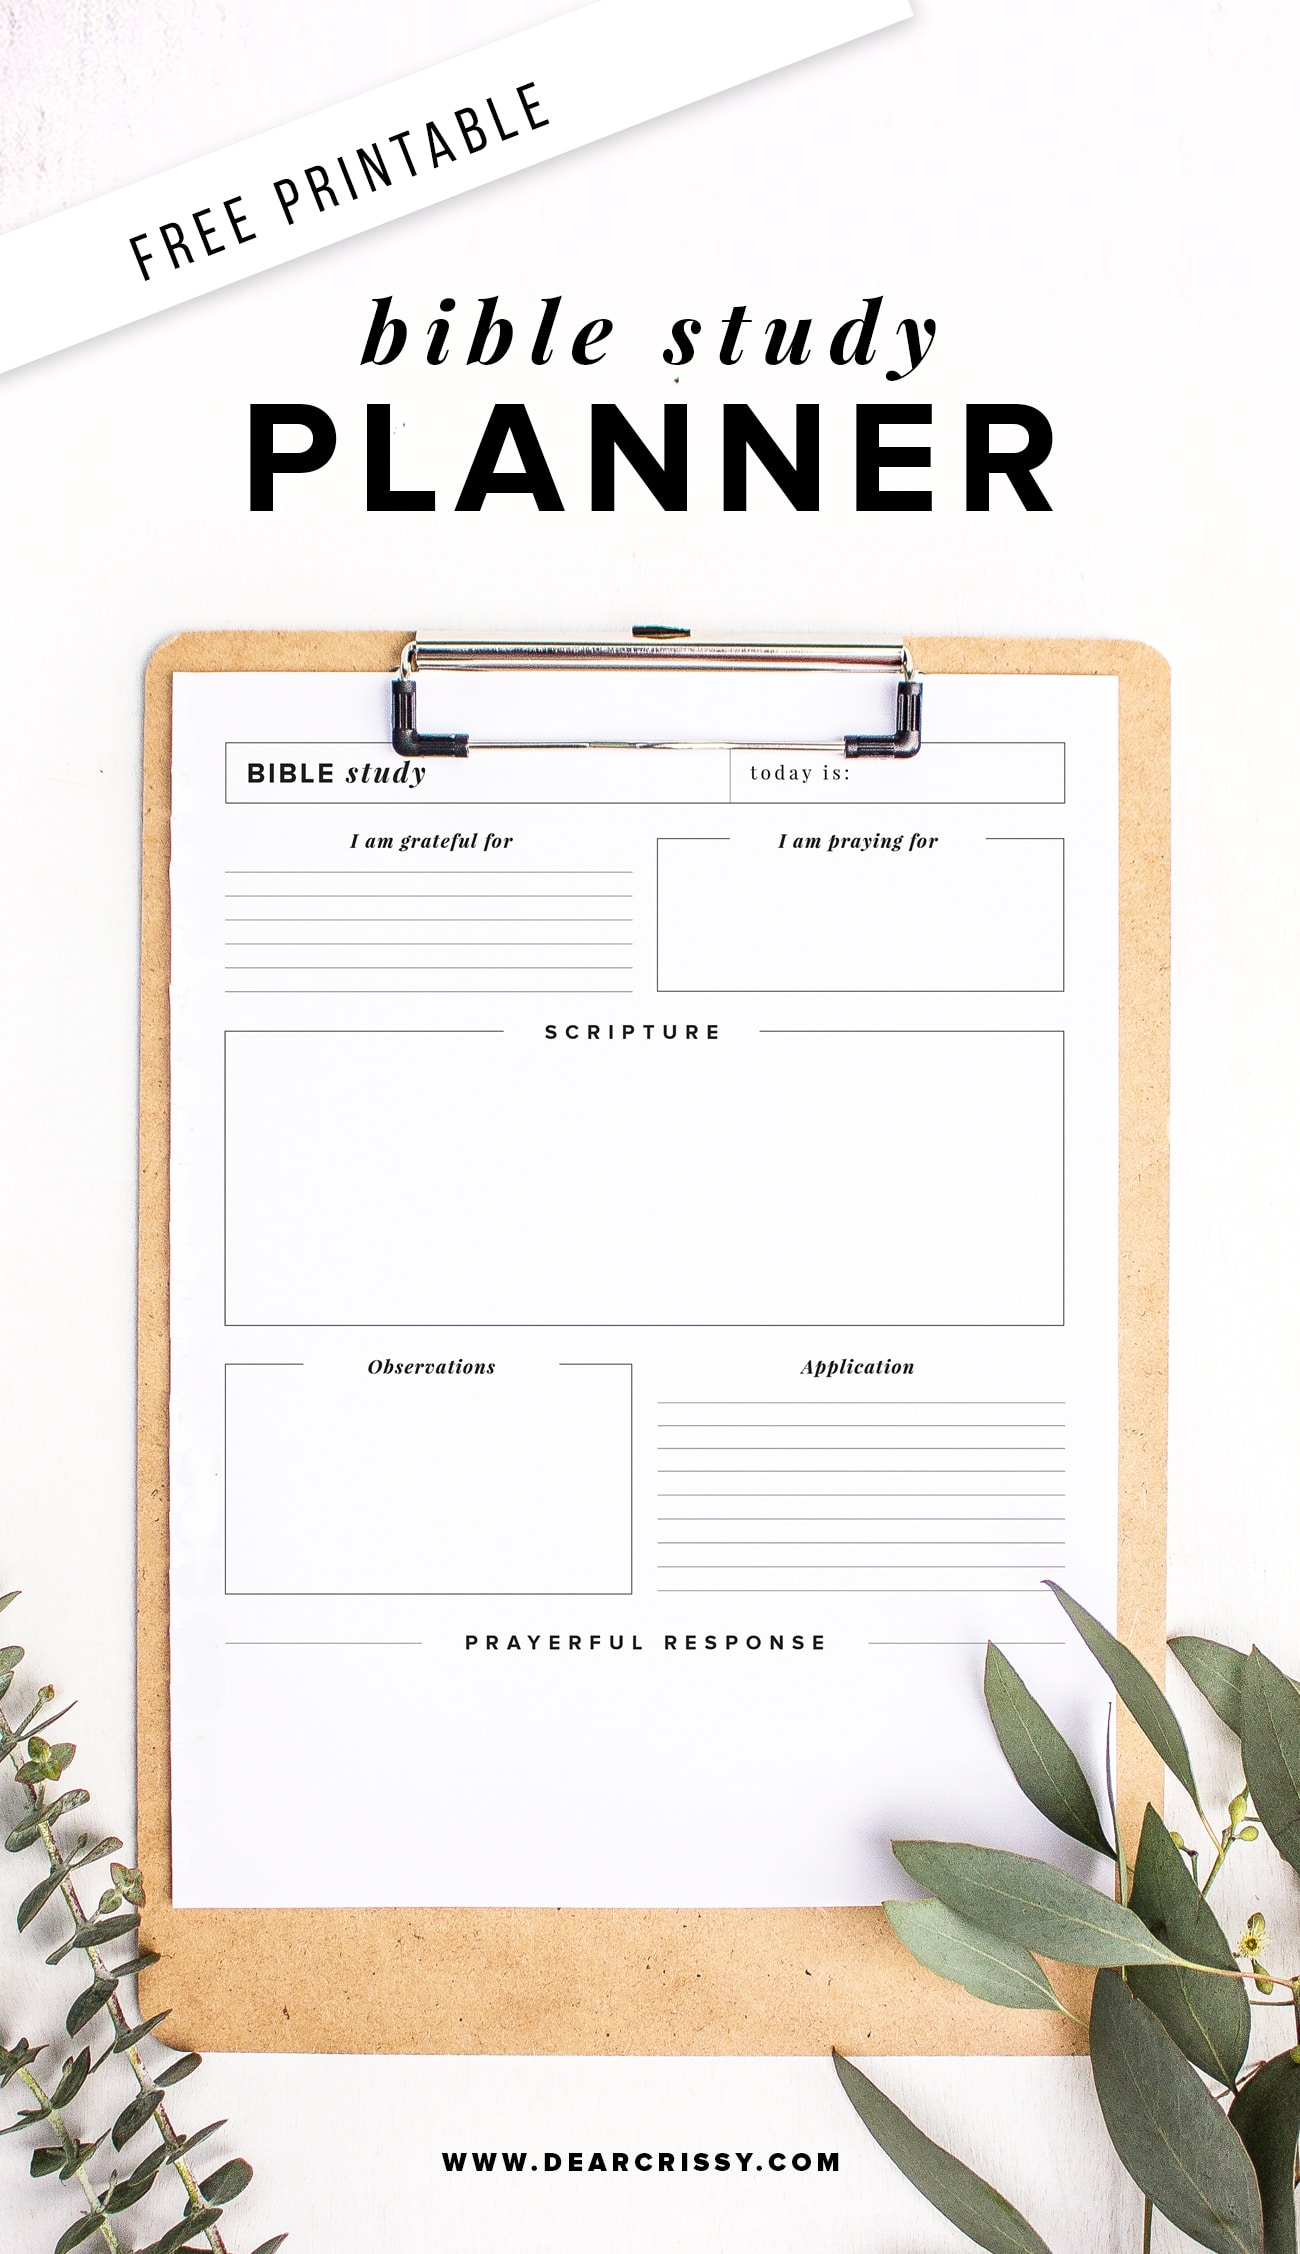 Free Printable Bible Study Planner - Soap Method Bible Study Worksheet! - Free Printable Bible Study Worksheets For Adults